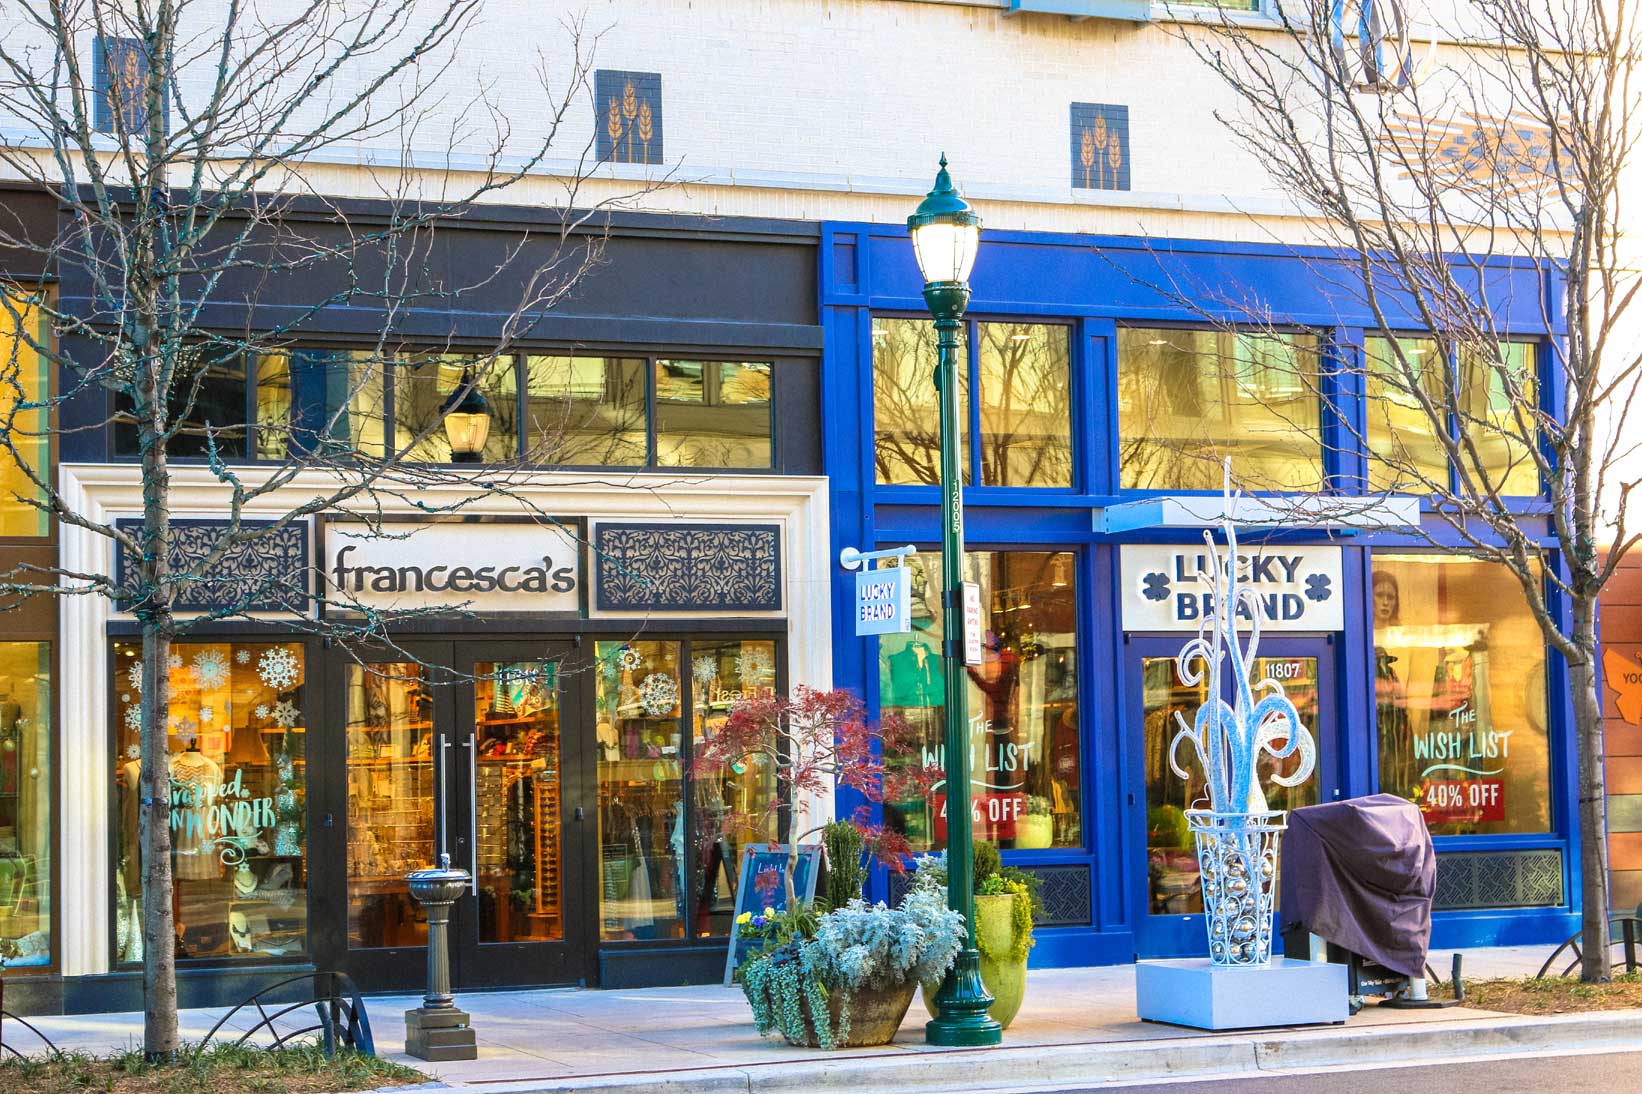 Francesca's and Lucky Brand in North Bethesda, MD